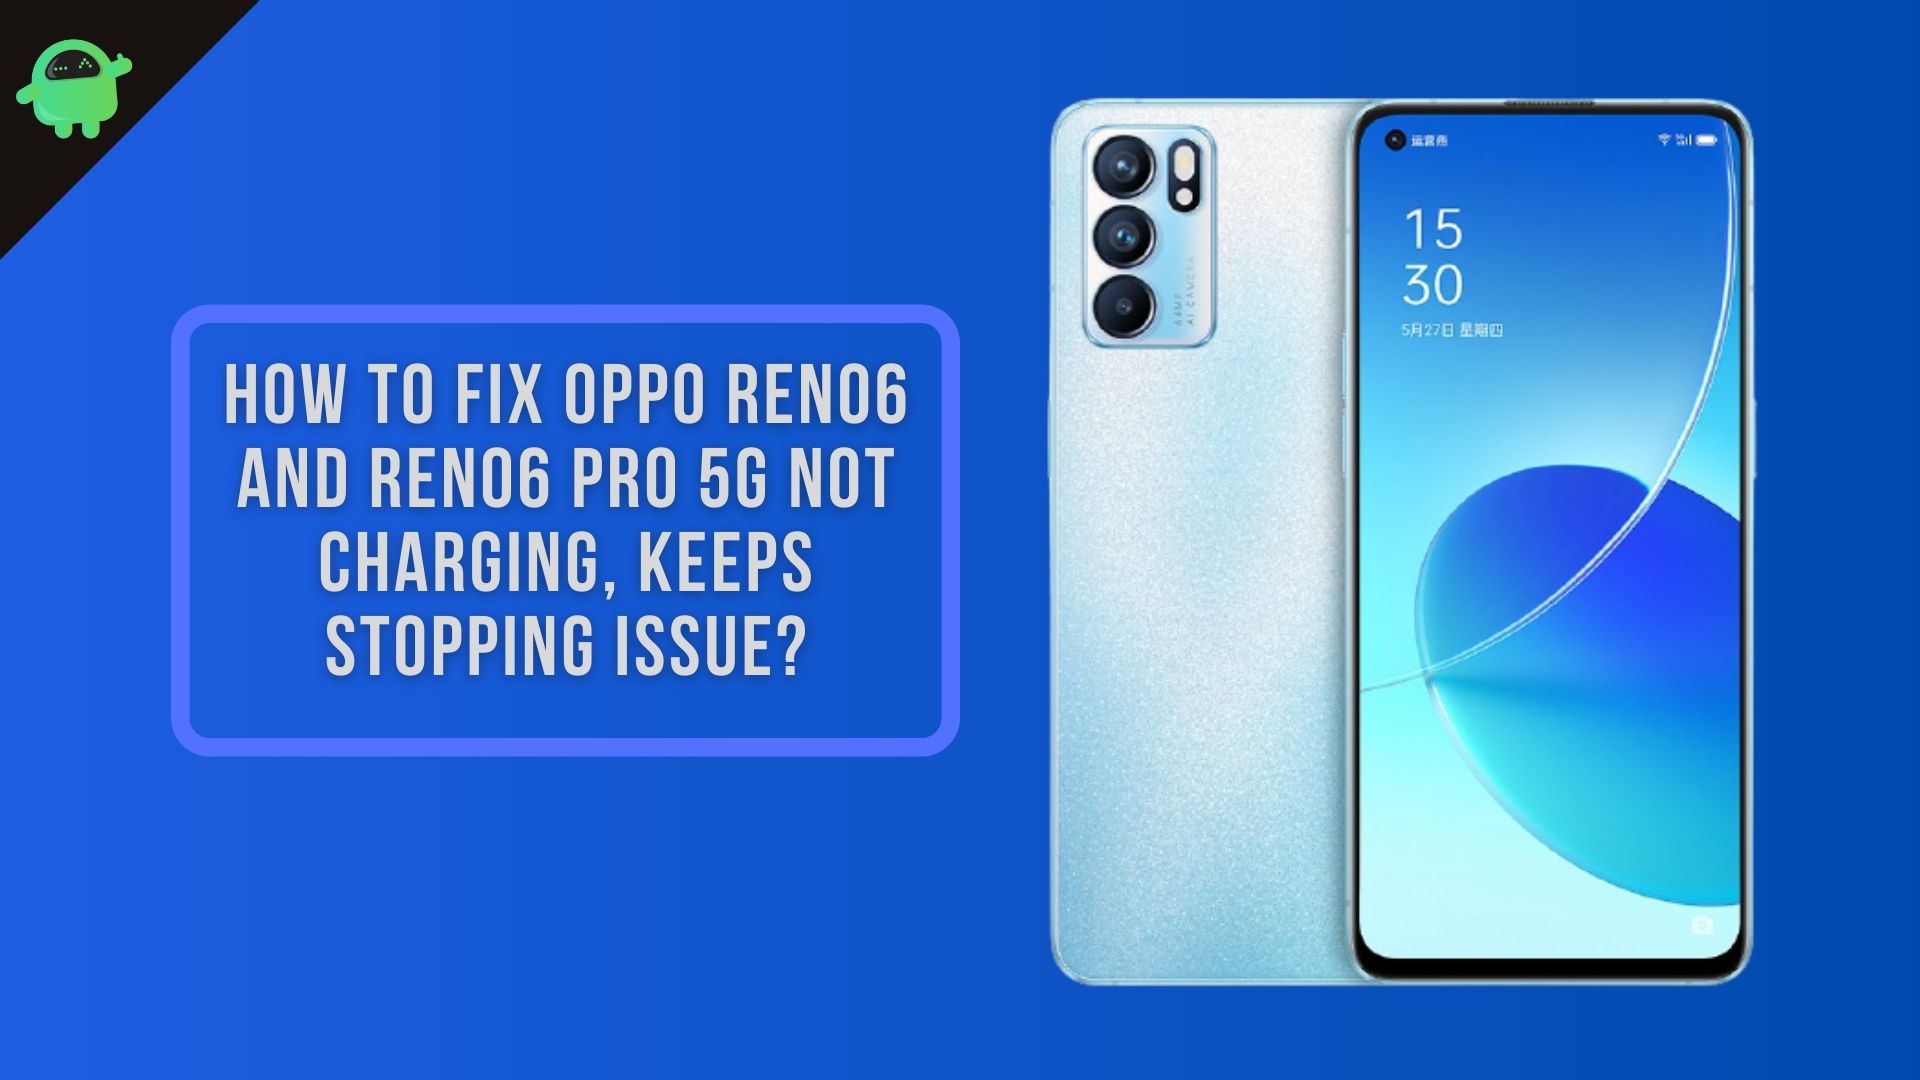 How to fix Oppo Reno6 and Reno6 Pro 5G Not Charging, Keeps Stopping Issue?